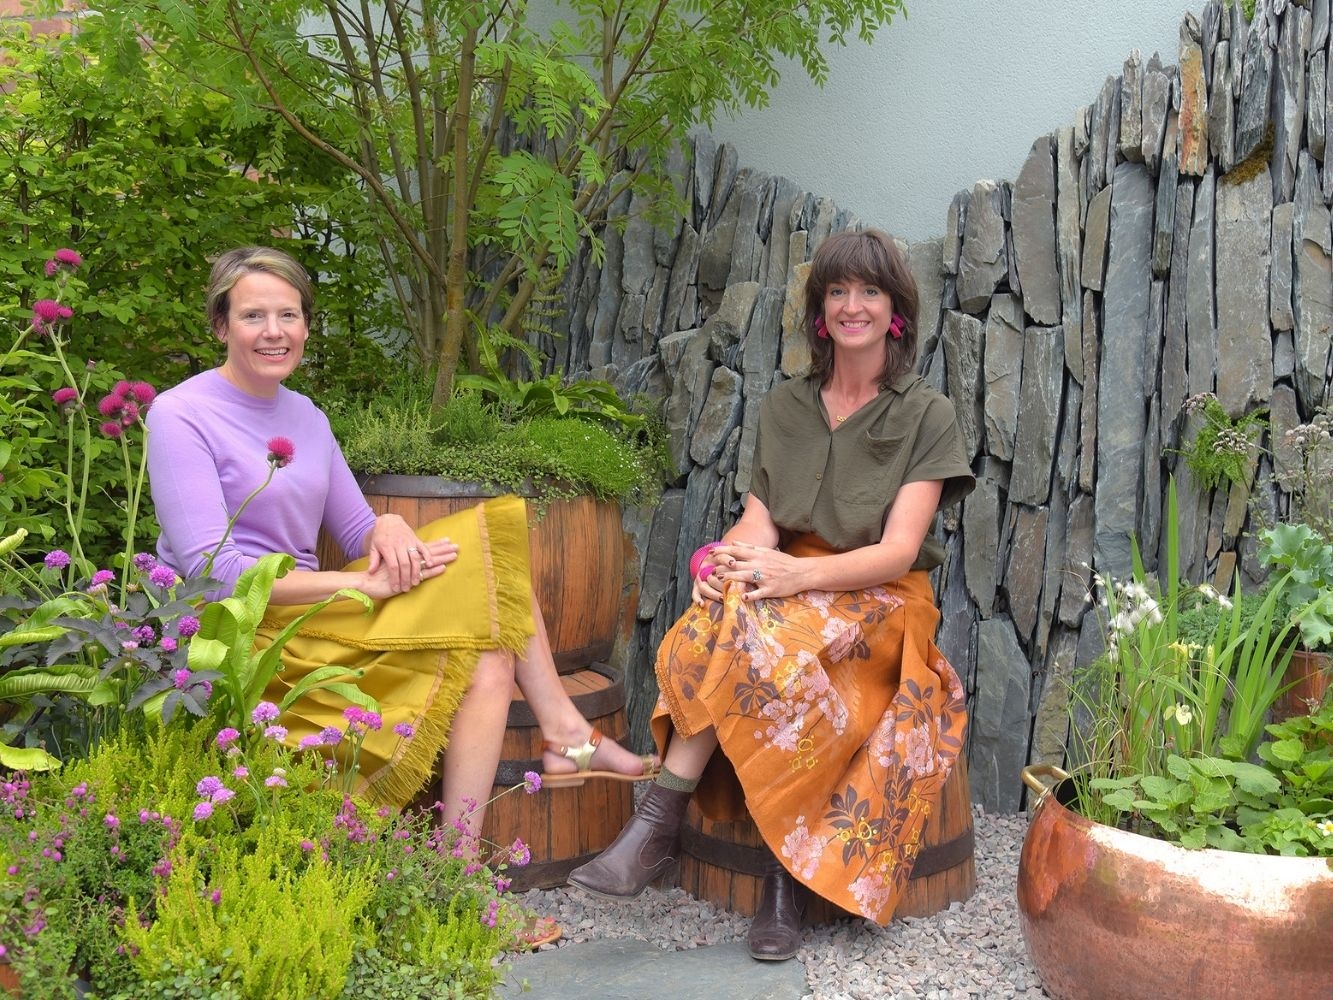 Andrea Chappell and Jane Porter pose in garden